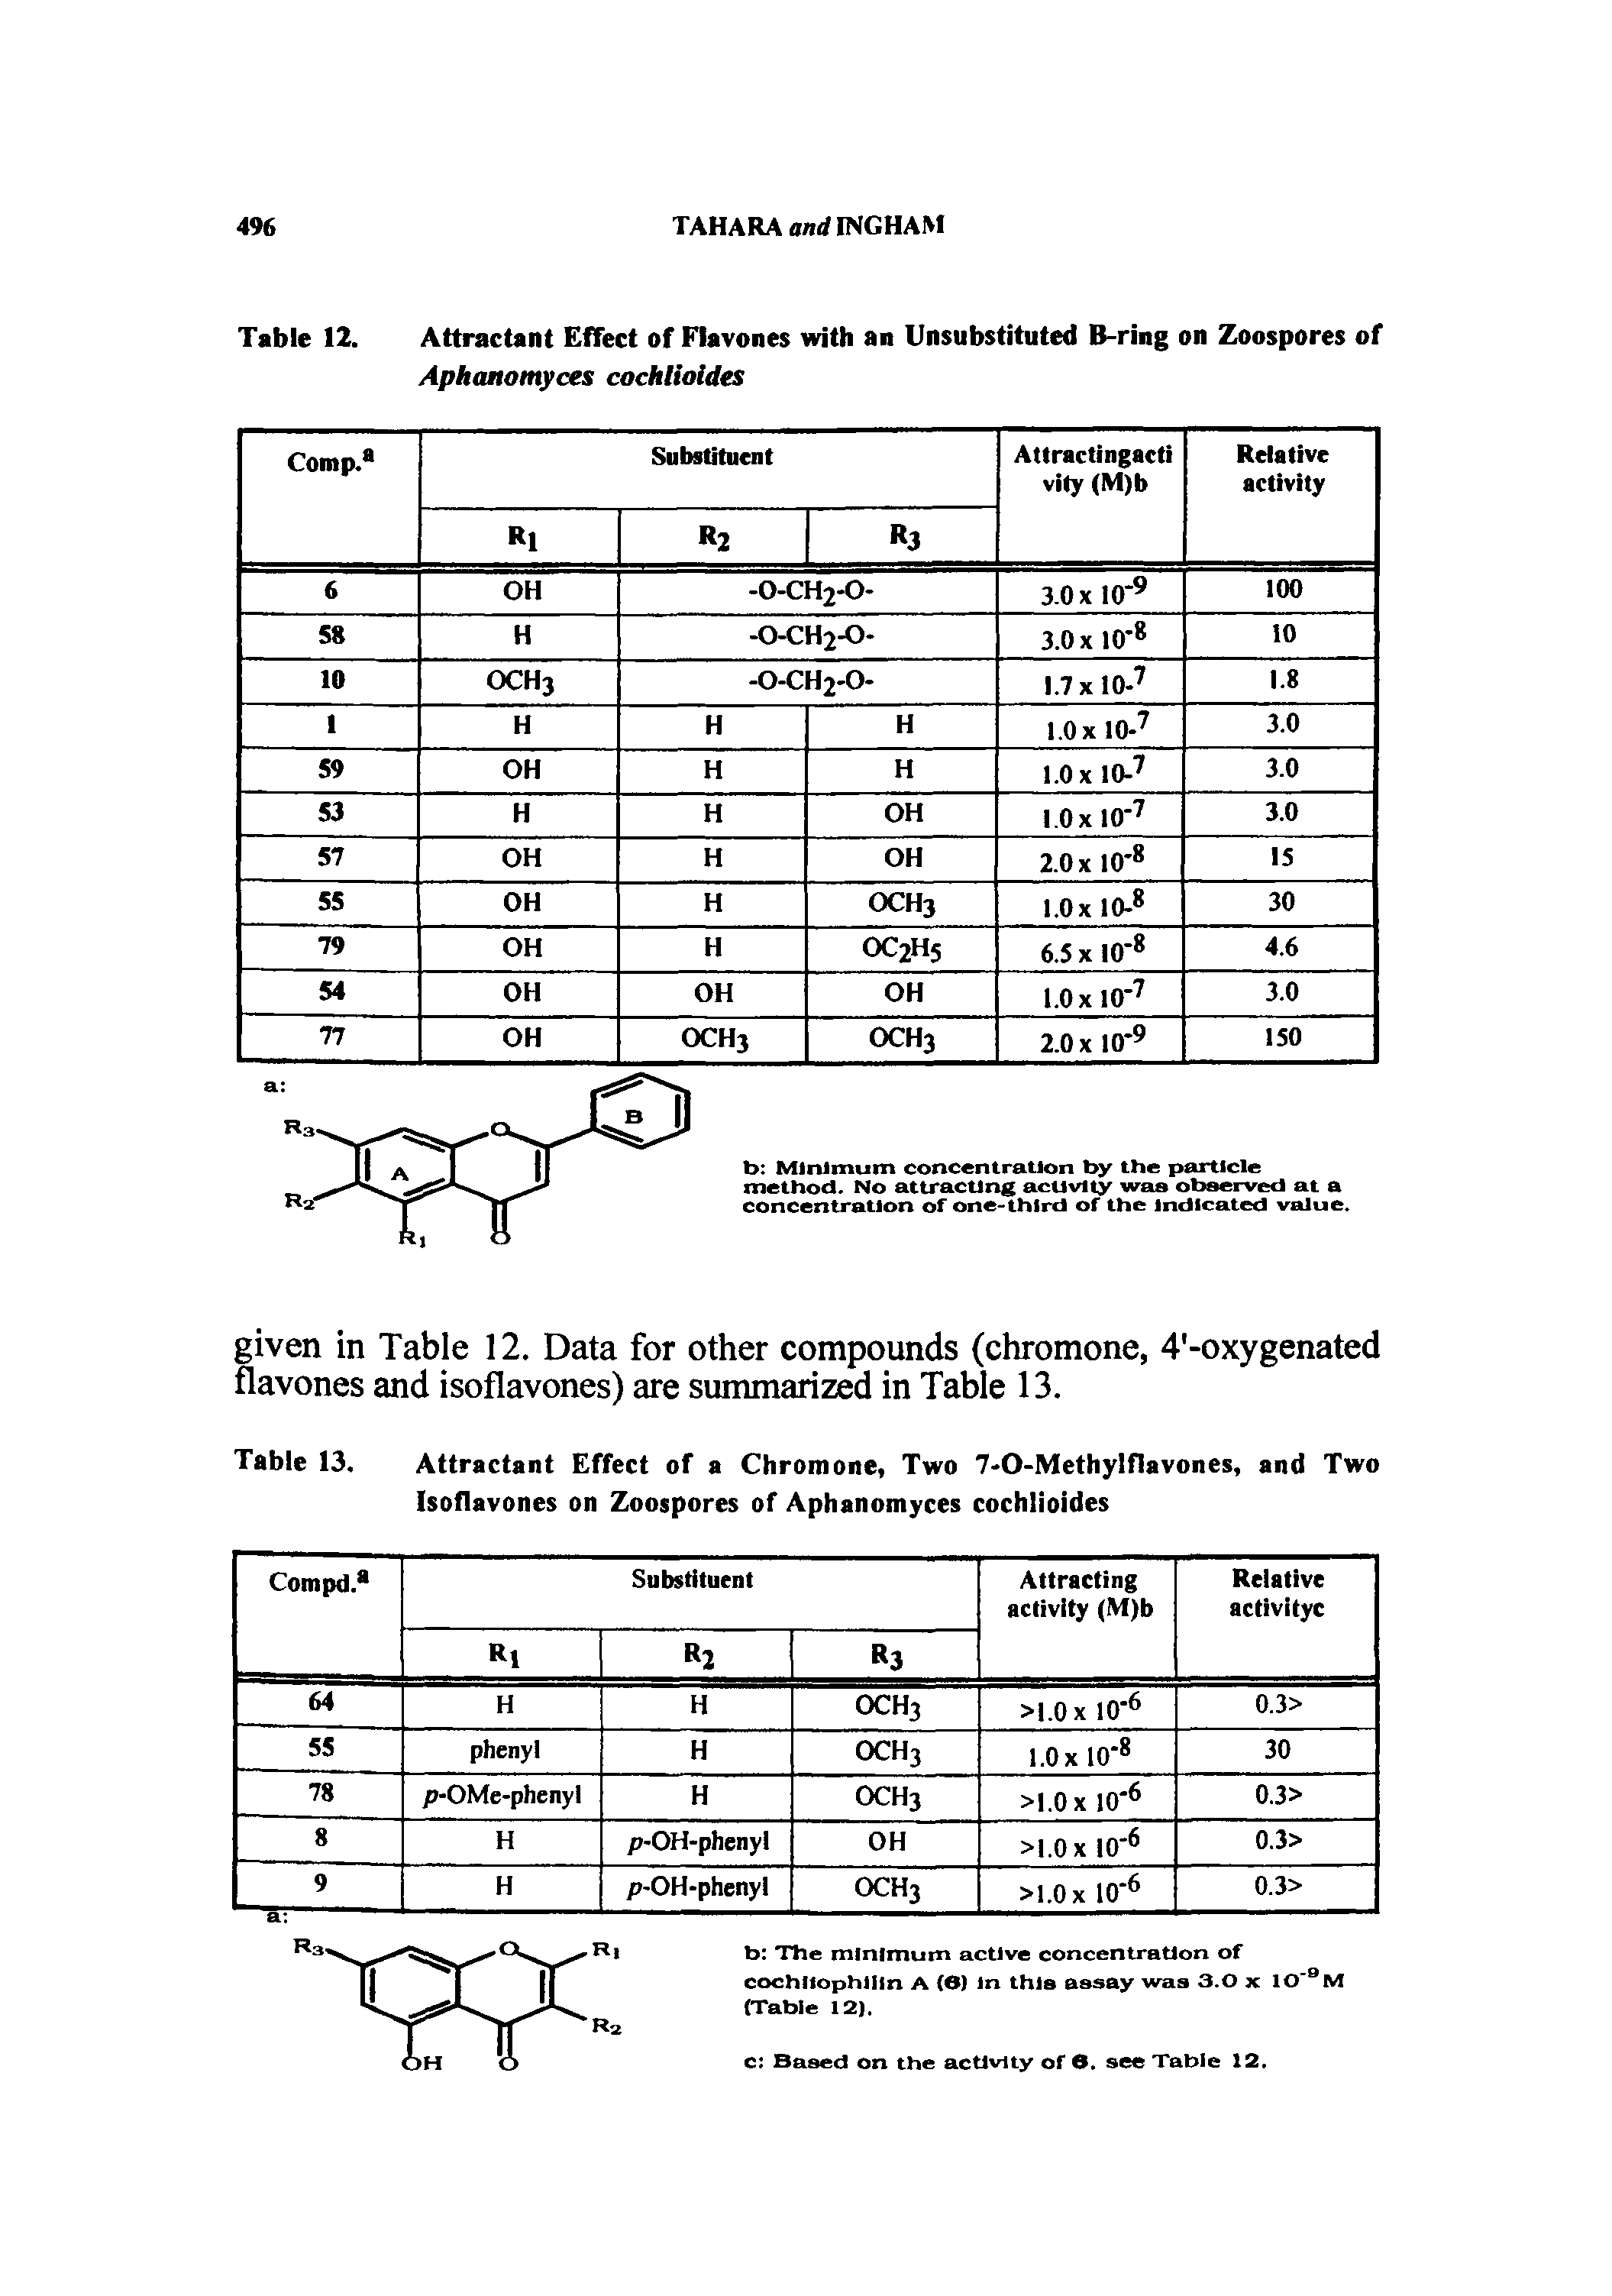 Table 13. Attractant Effect of a Chromone, Two 7-O-Methylflavones, and Two Isoflavones on Zoospores of Aphanomyces cochlioides...